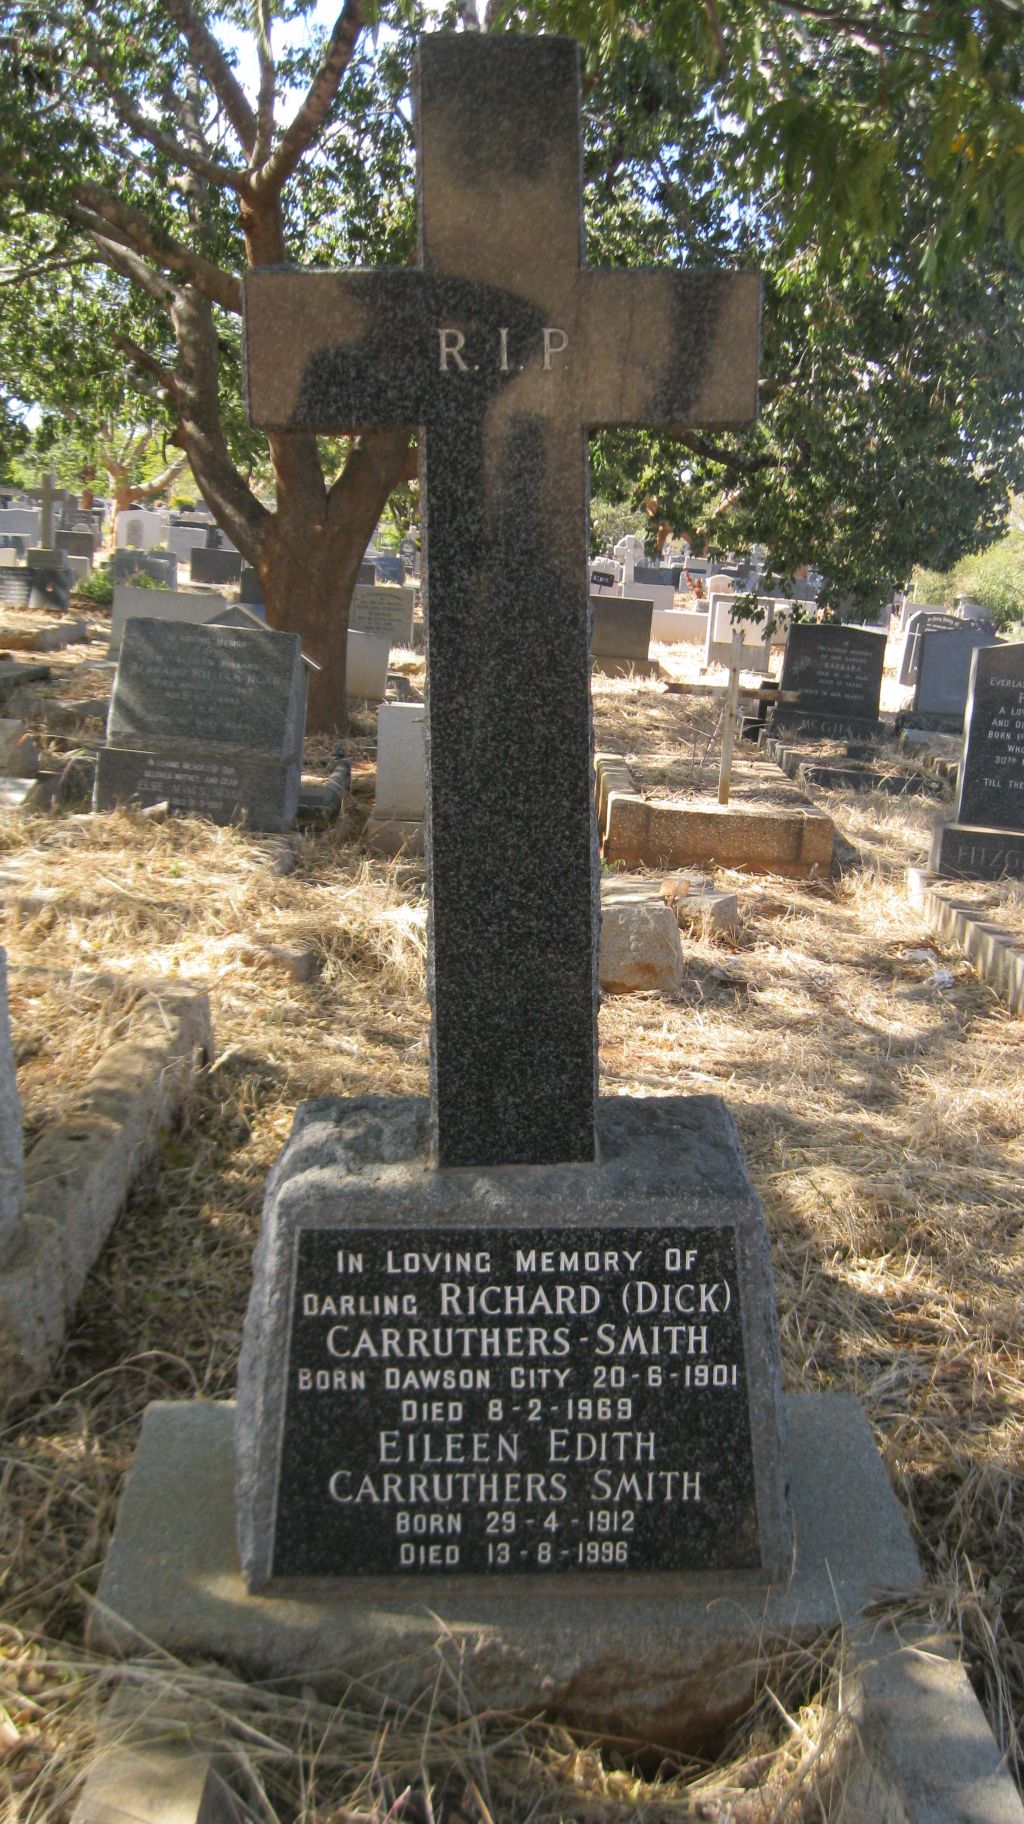 cemeteries_headstone_byo_carruthers_smith_1969